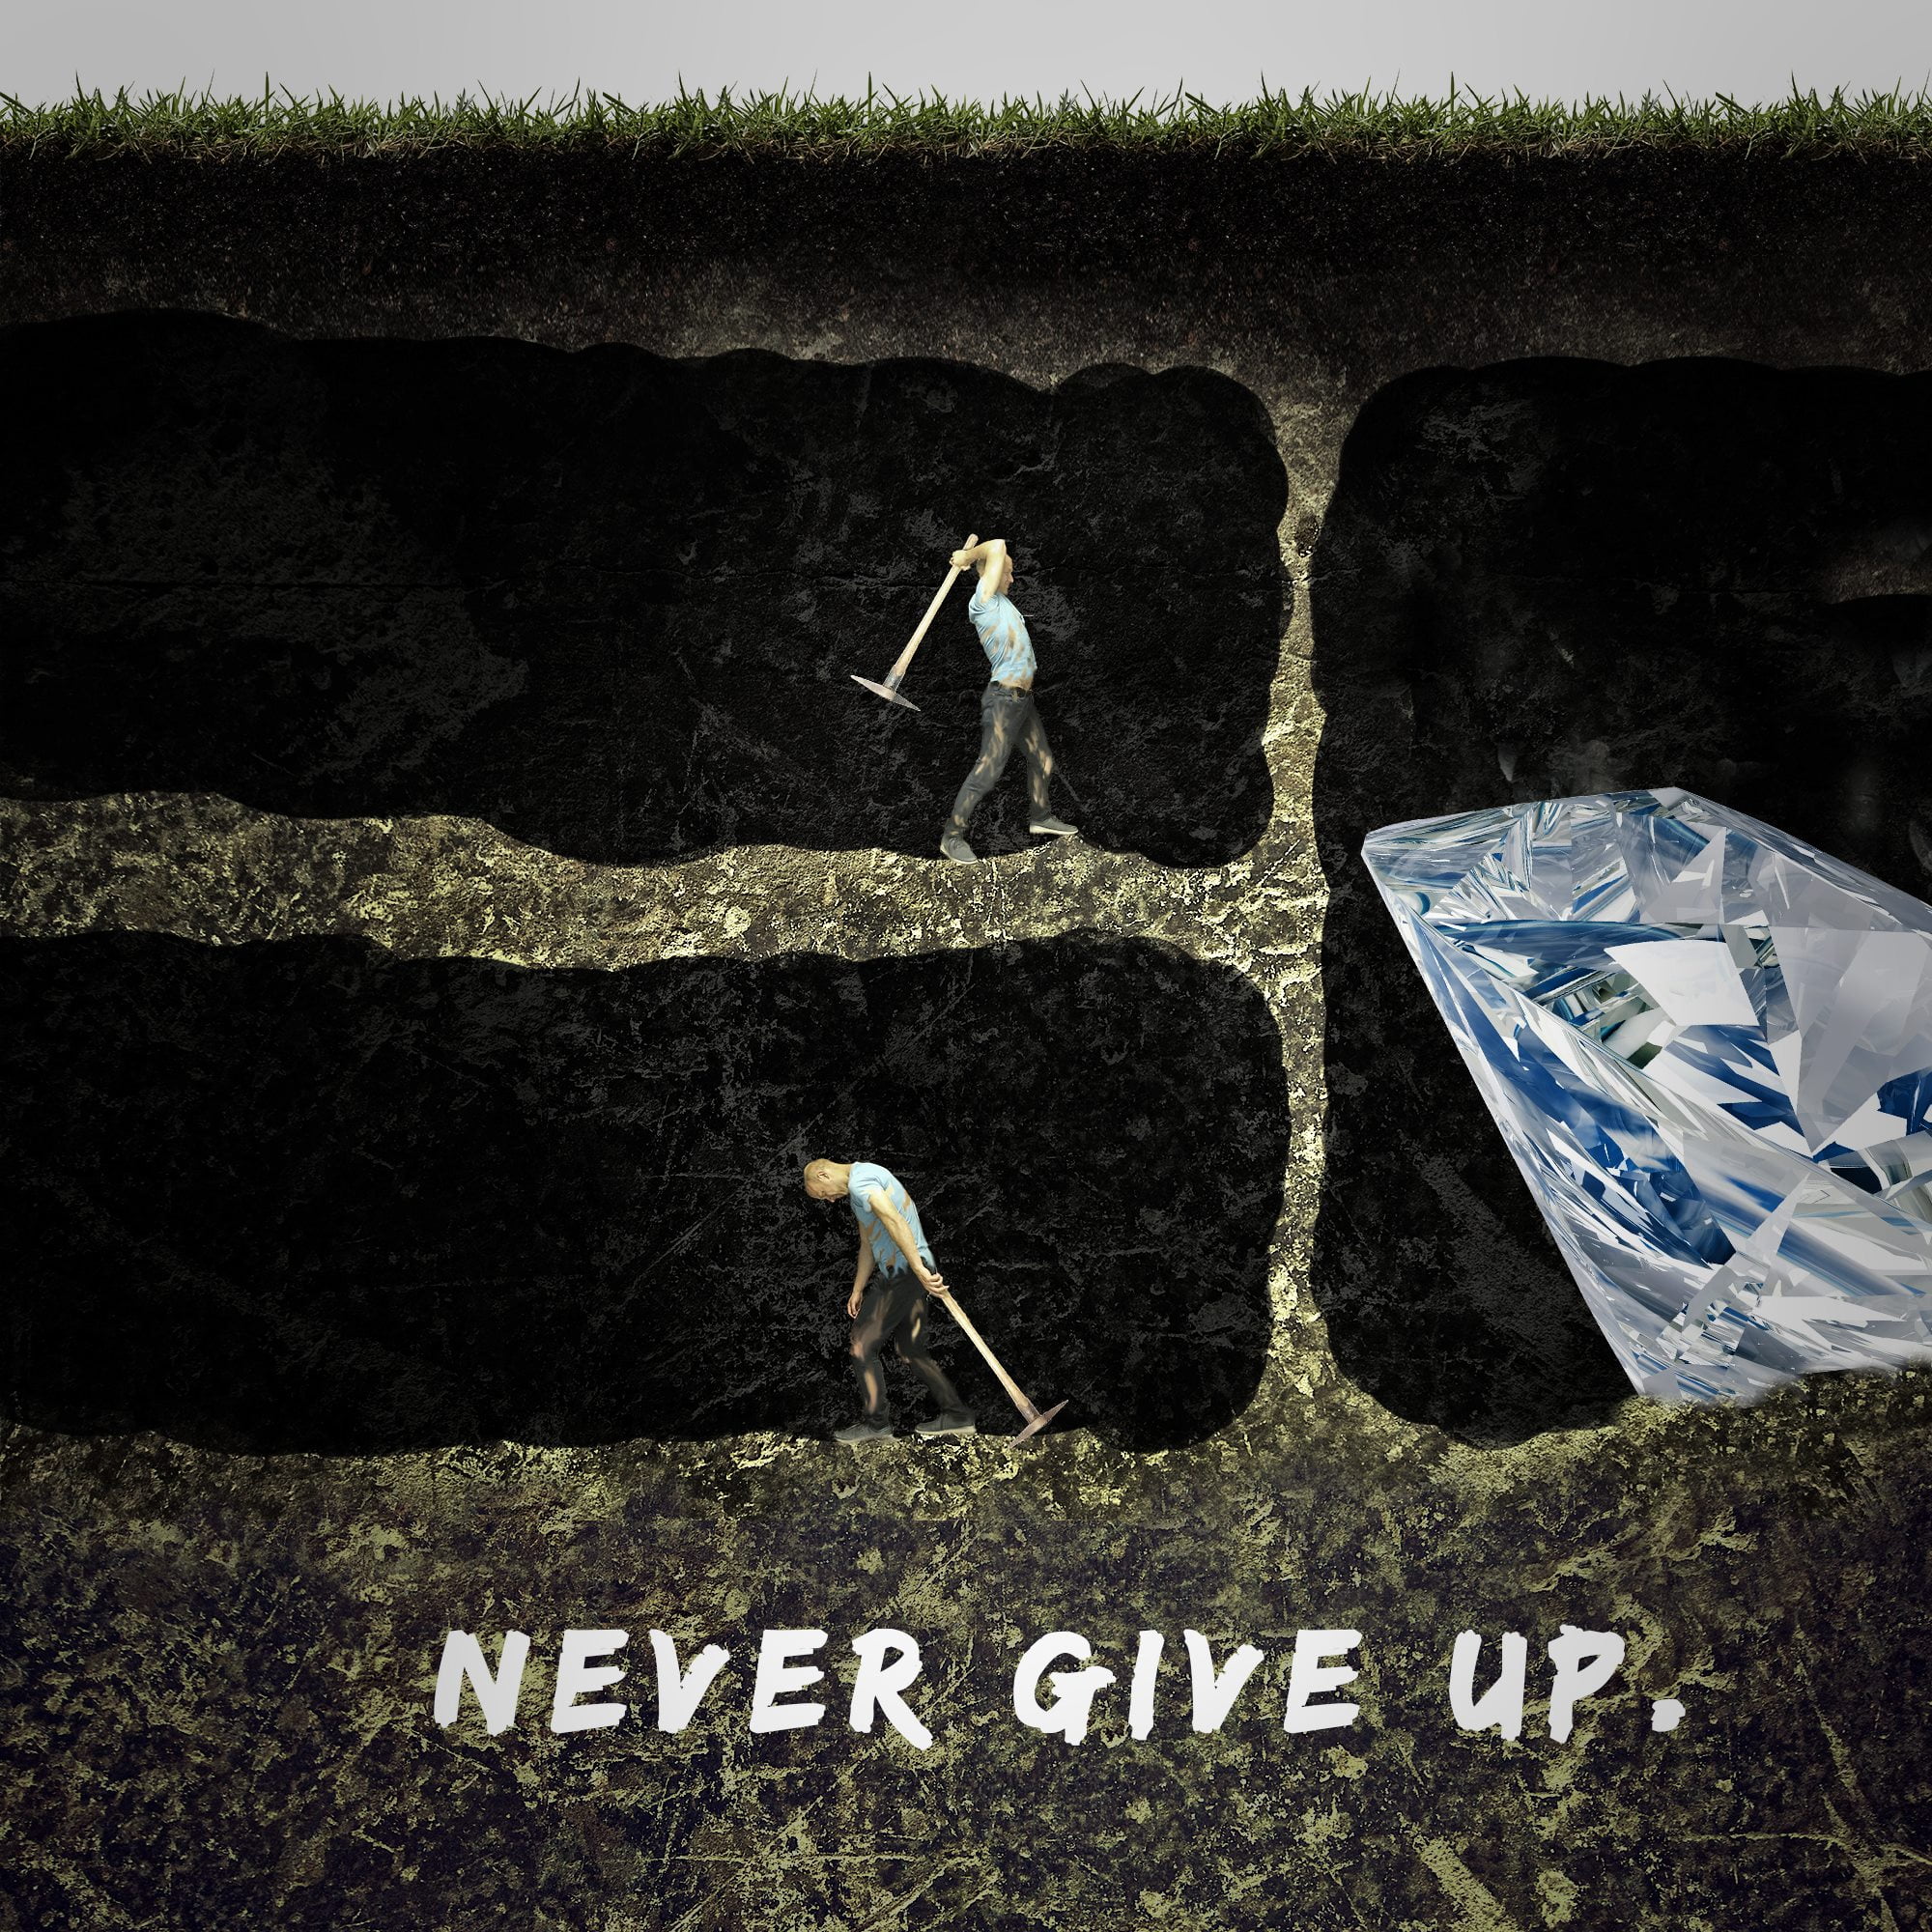 Never-Give-up-Surreal-photography-diamond-dig